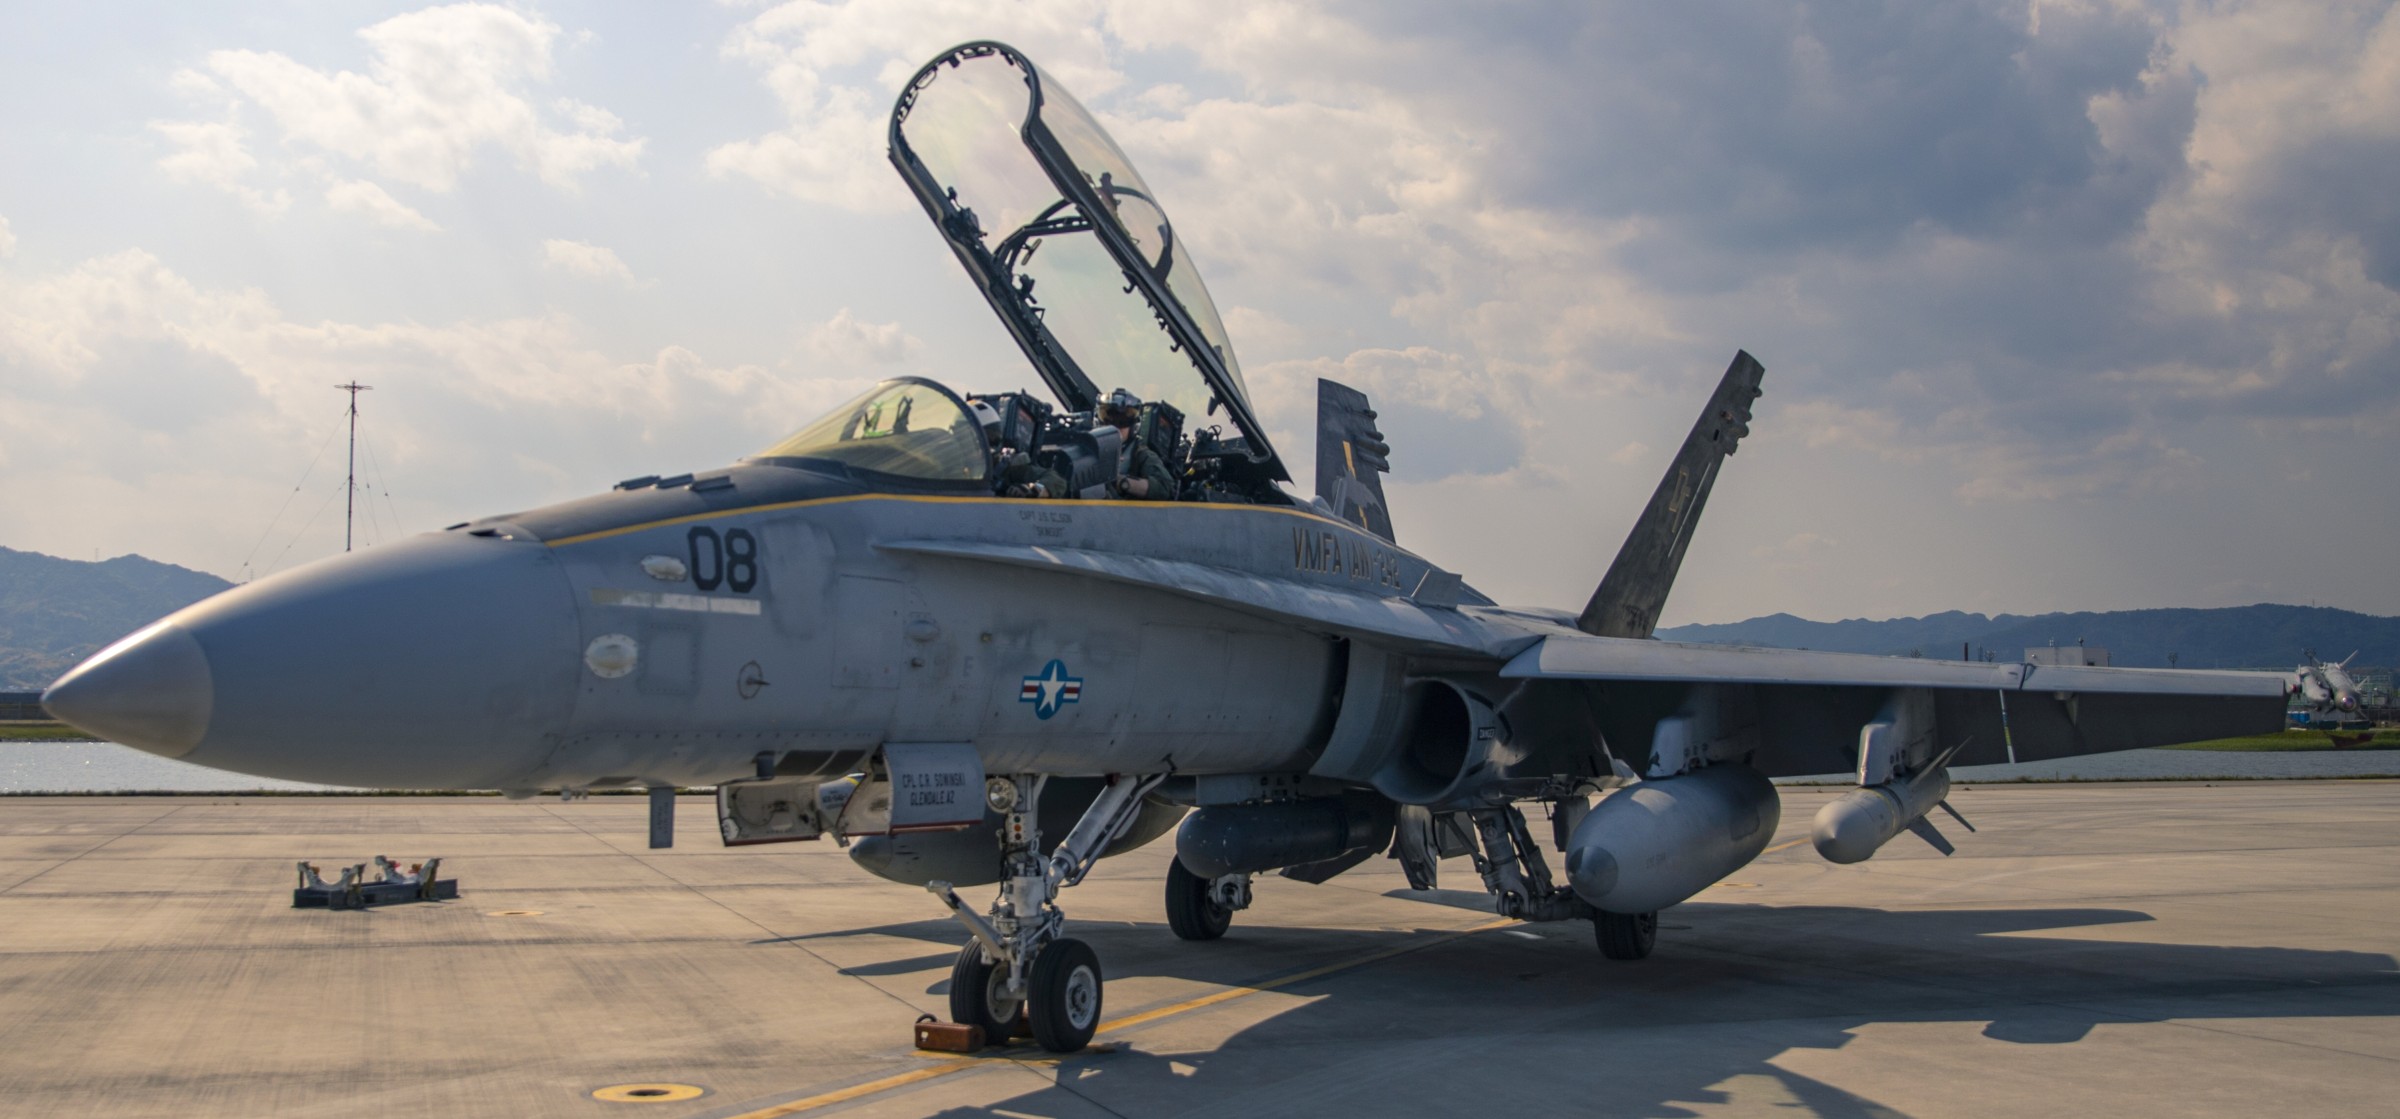 vmfa(aw)-242 bats marine all-weather fighter attack squadron usmc f/a-18d hornet 116